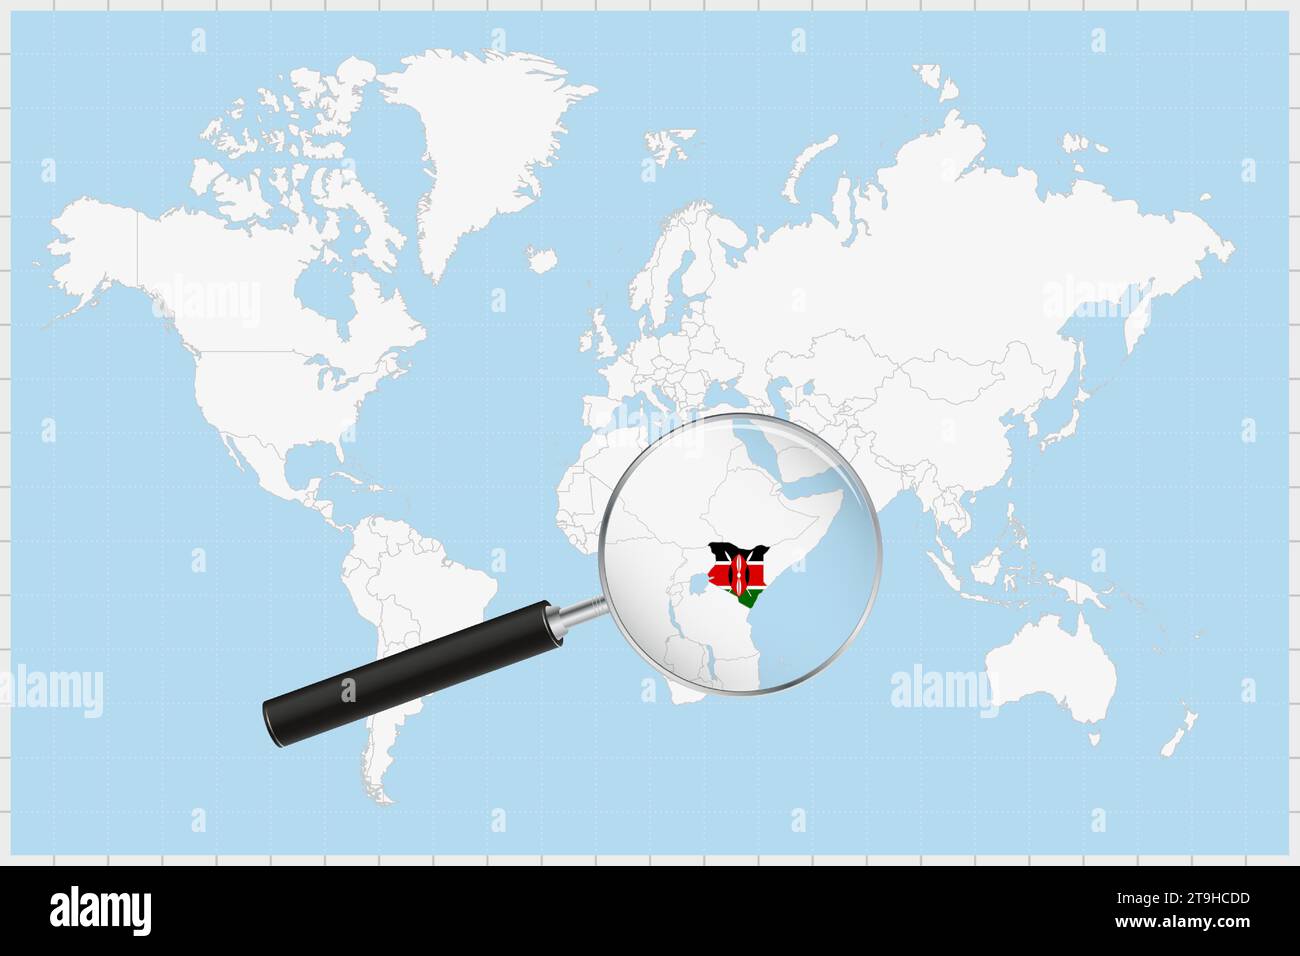 Magnifying glass showing a map of Kenya on a world map. Kenya flag and map enlarge in lens. Vector Illustration. Stock Vector